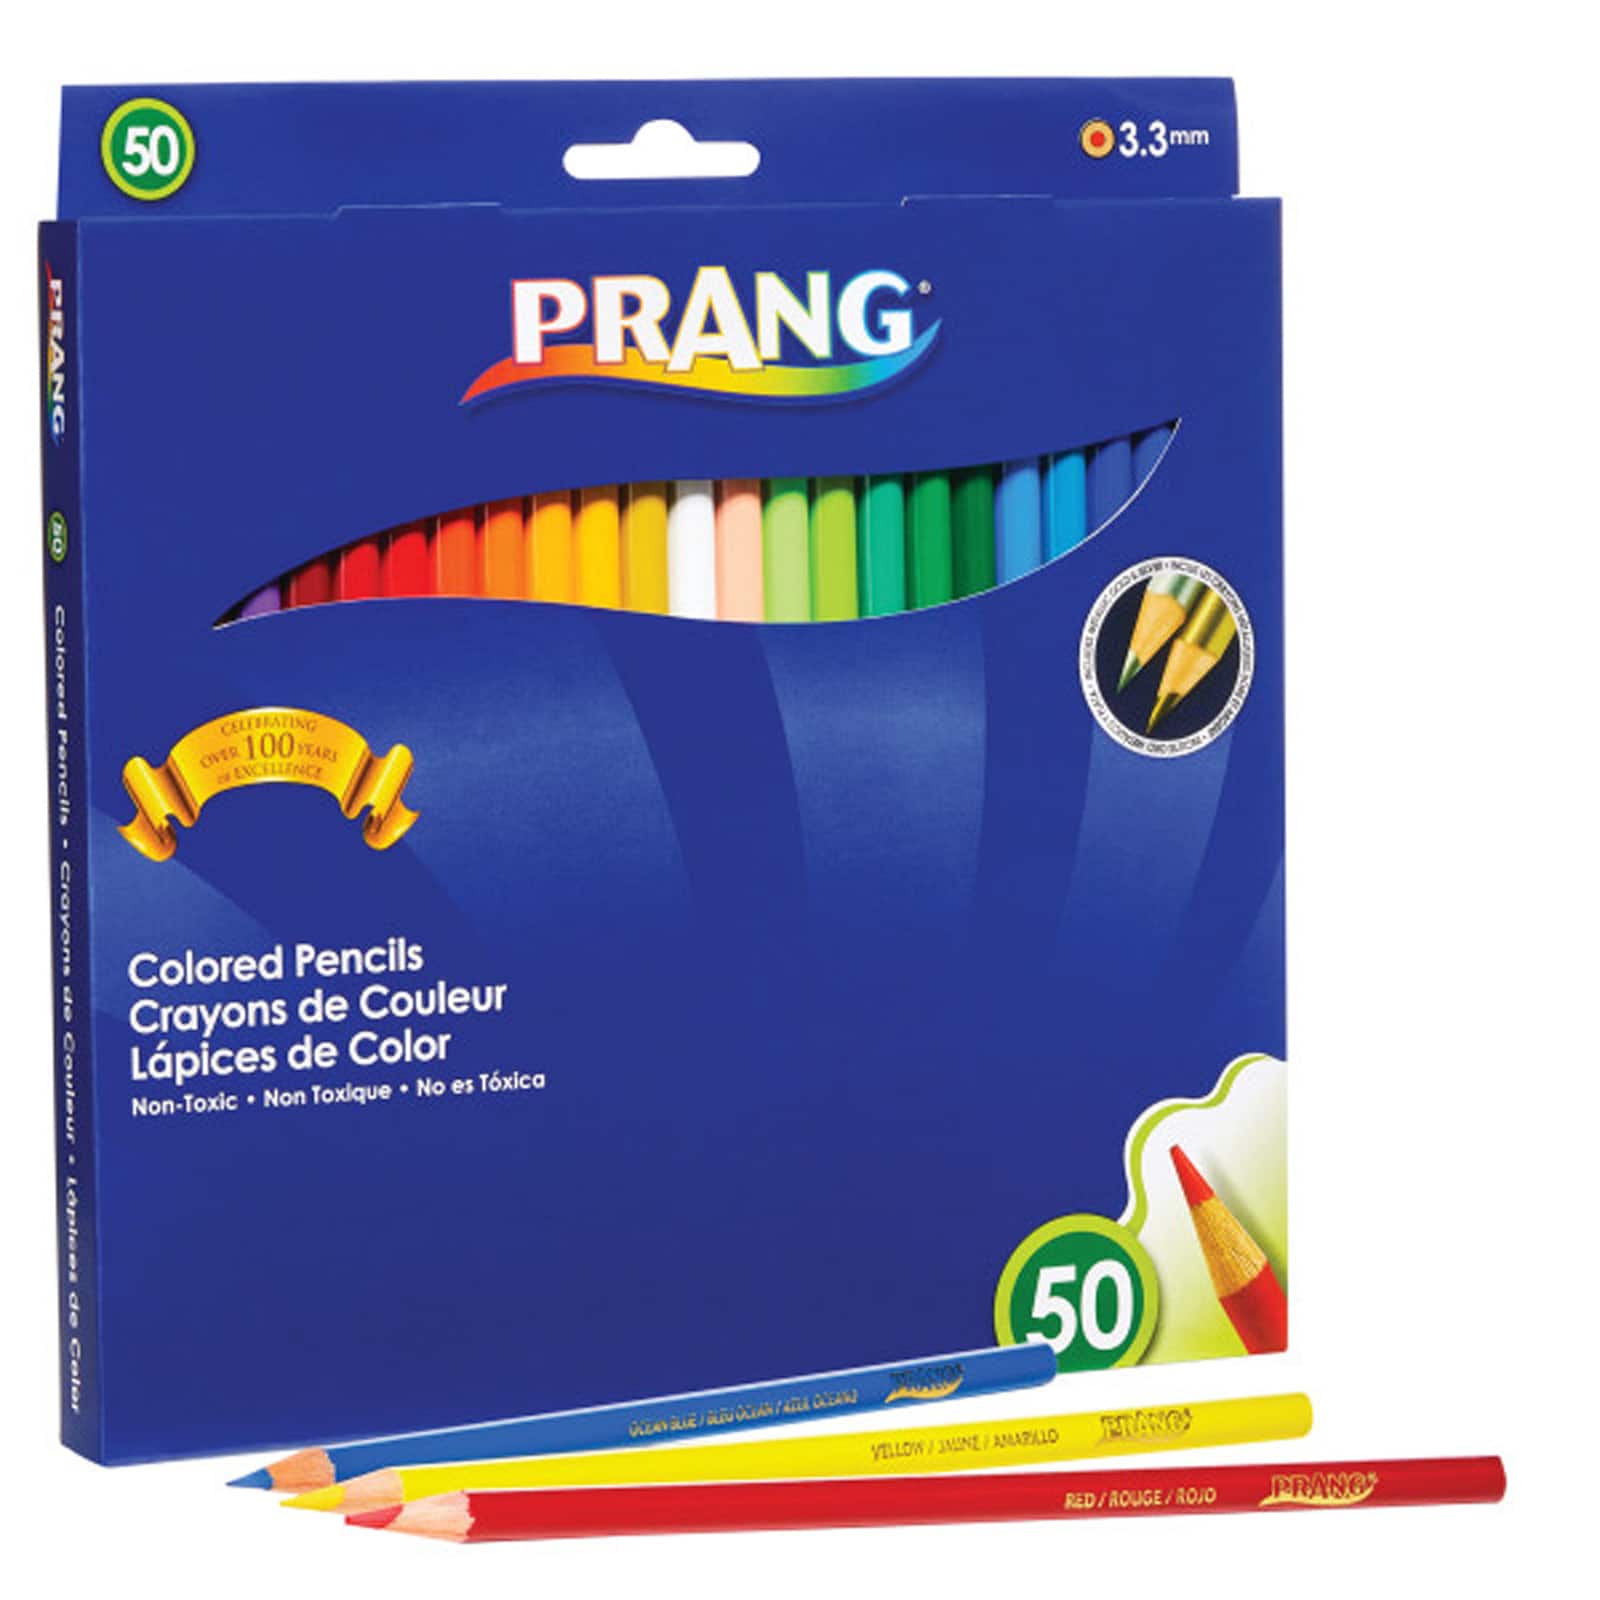 12 Packs: 50 Ct. (600 Total) Colored Pencils by Creatology, Size: 8.3 x 0.63 x 7.33, Assorted